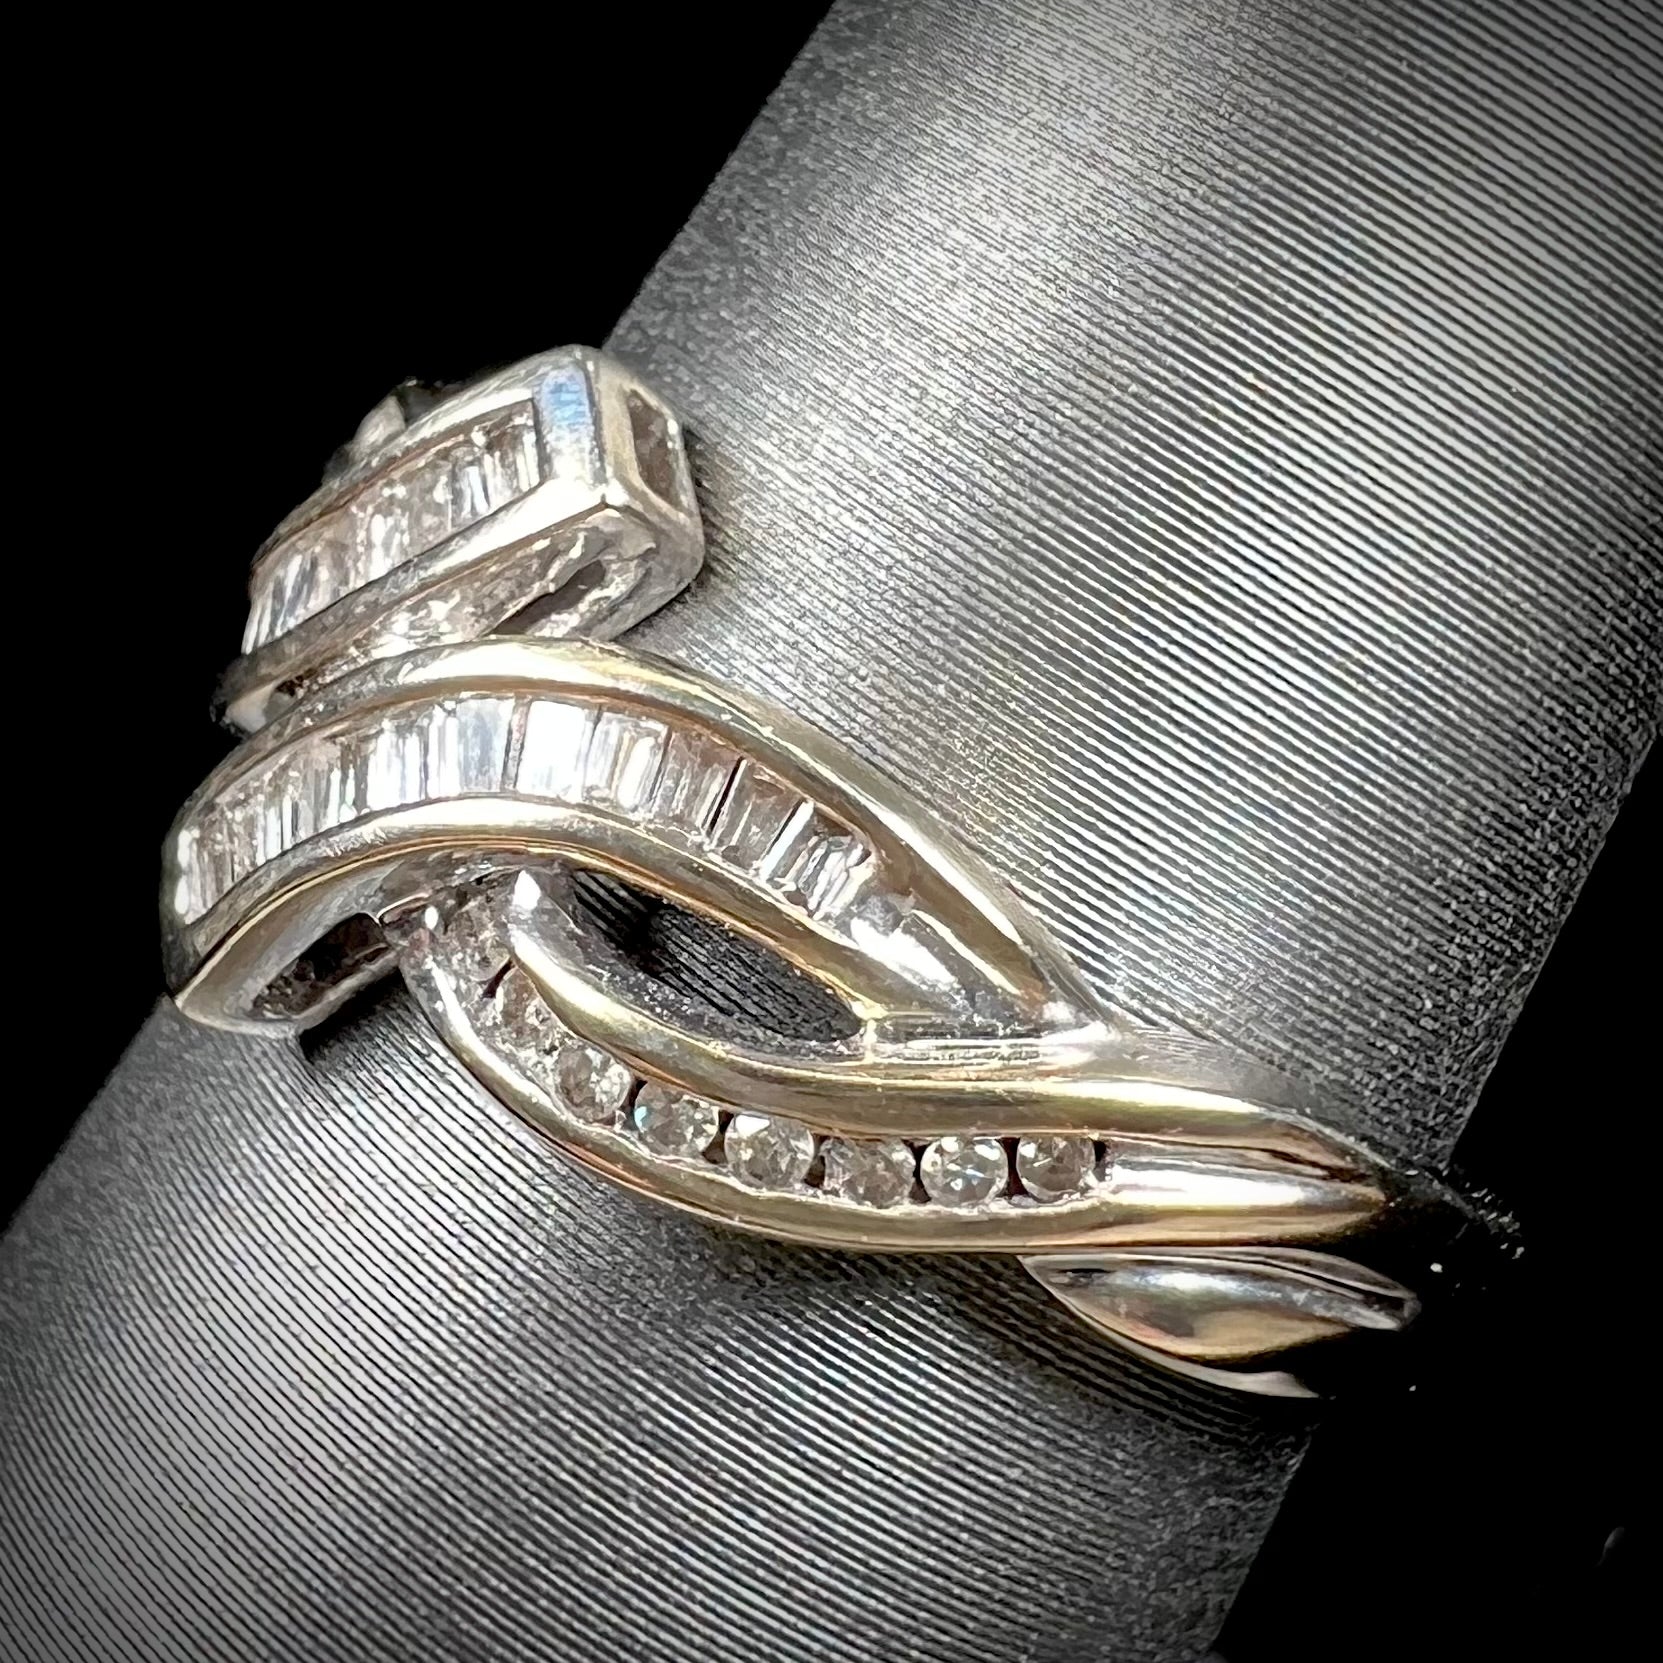 A ladies' white gold crisscross style ring channel set with round and baguette cut diamonds.